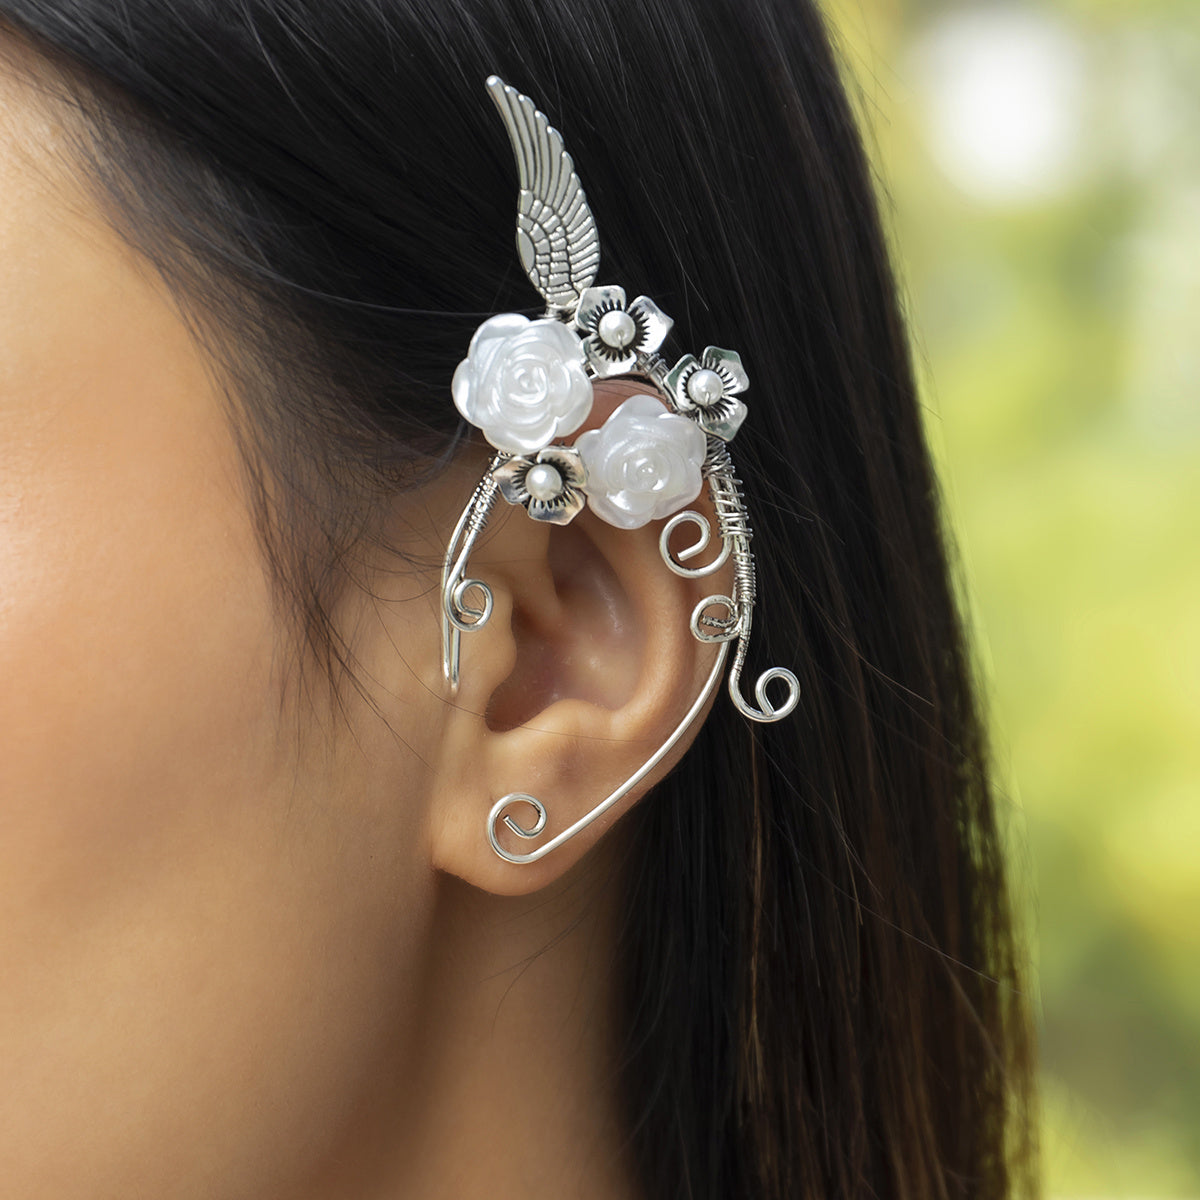 Delicate Vintage Flower Ear Cuff Earrings - A Perfect Gift for the Special Woman in Your Life